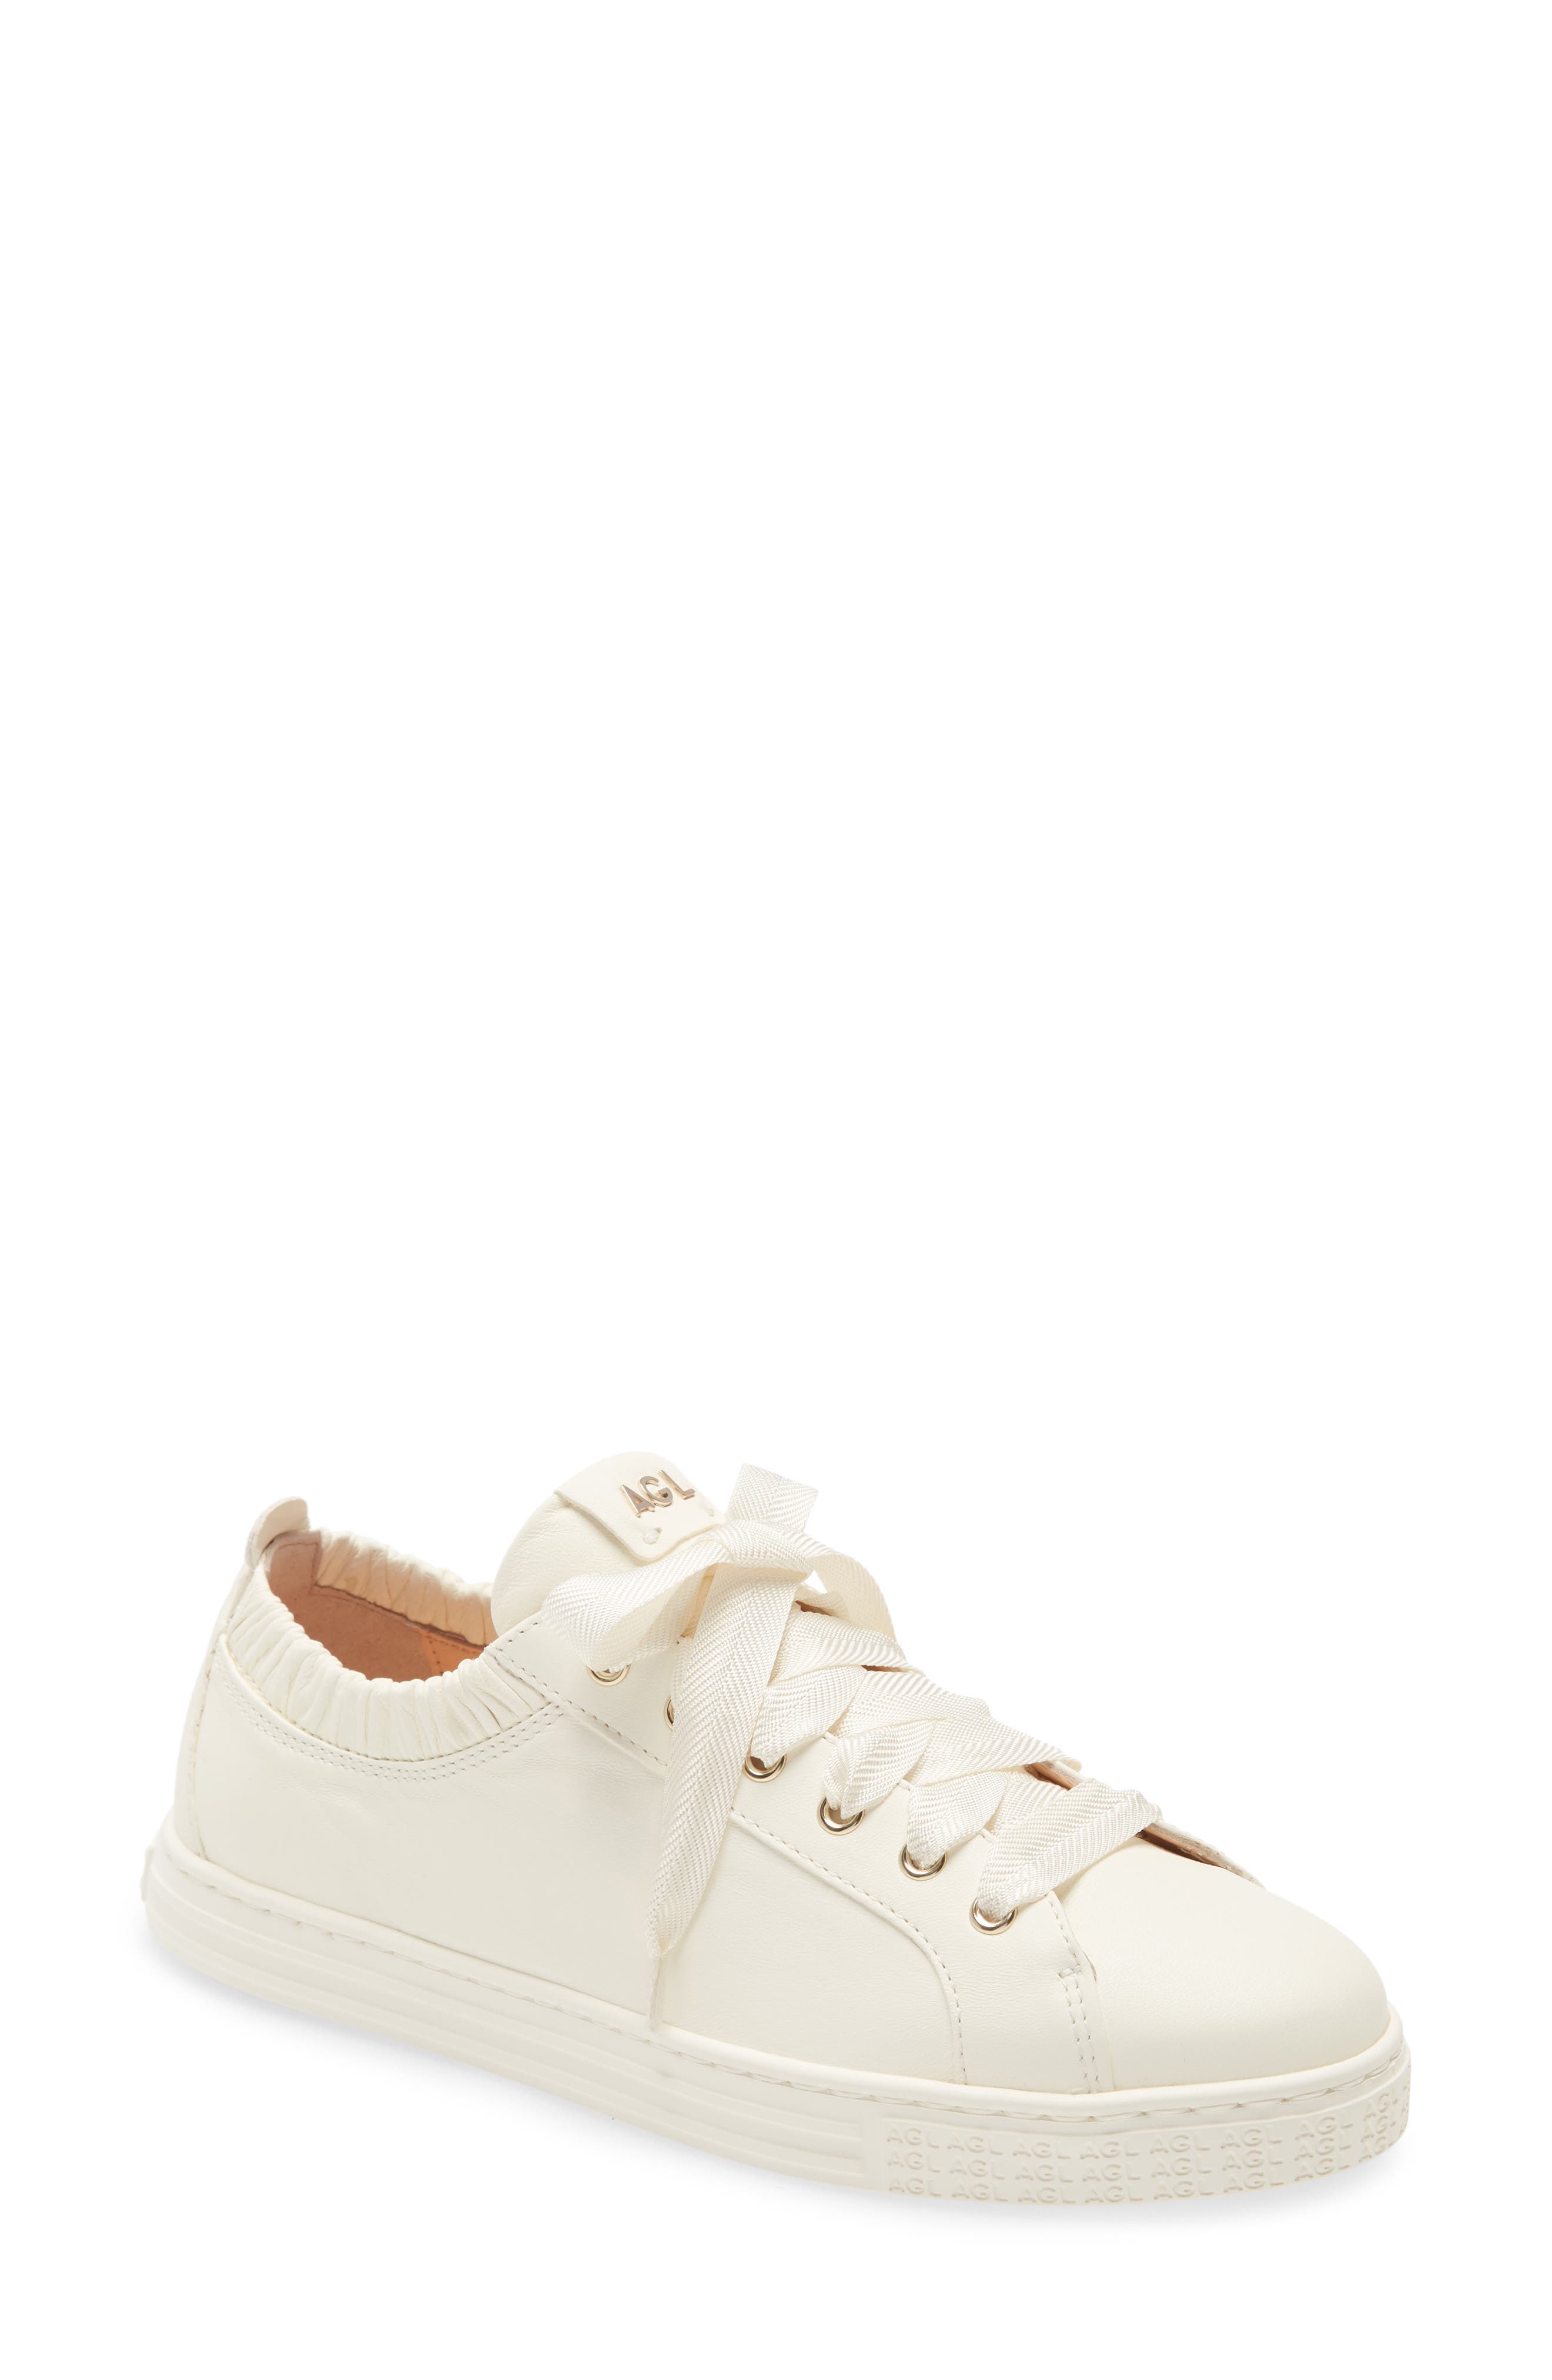 Women's AGL Shoes | Nordstrom